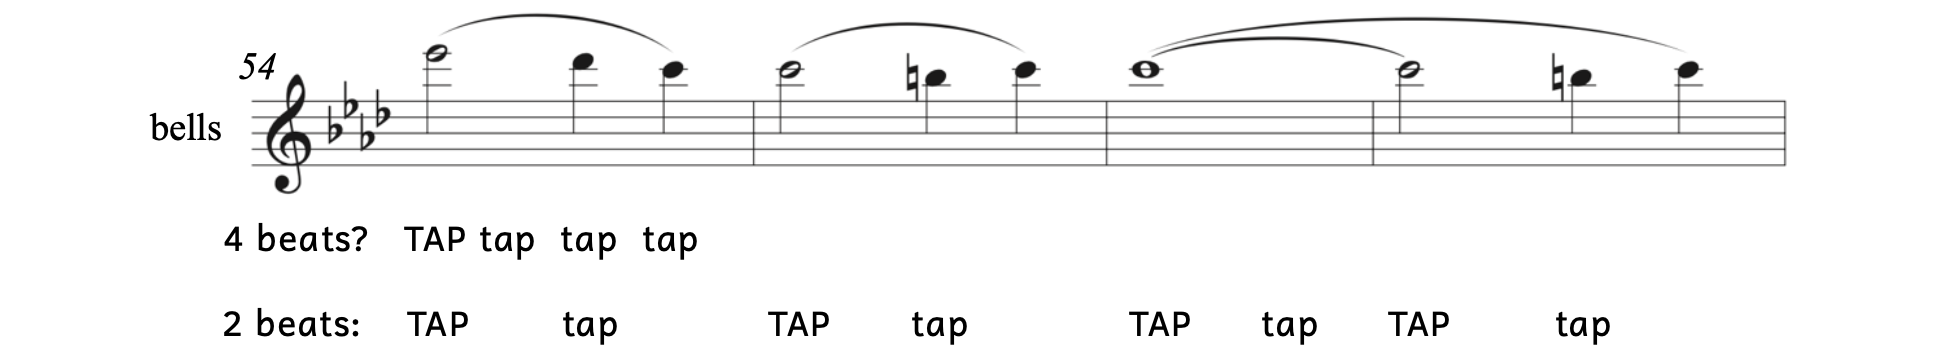 You would tap your foot twice per measure in Soosa's "The Stars and Stripes Forever". Tapping your foot four times per measure is too quick.